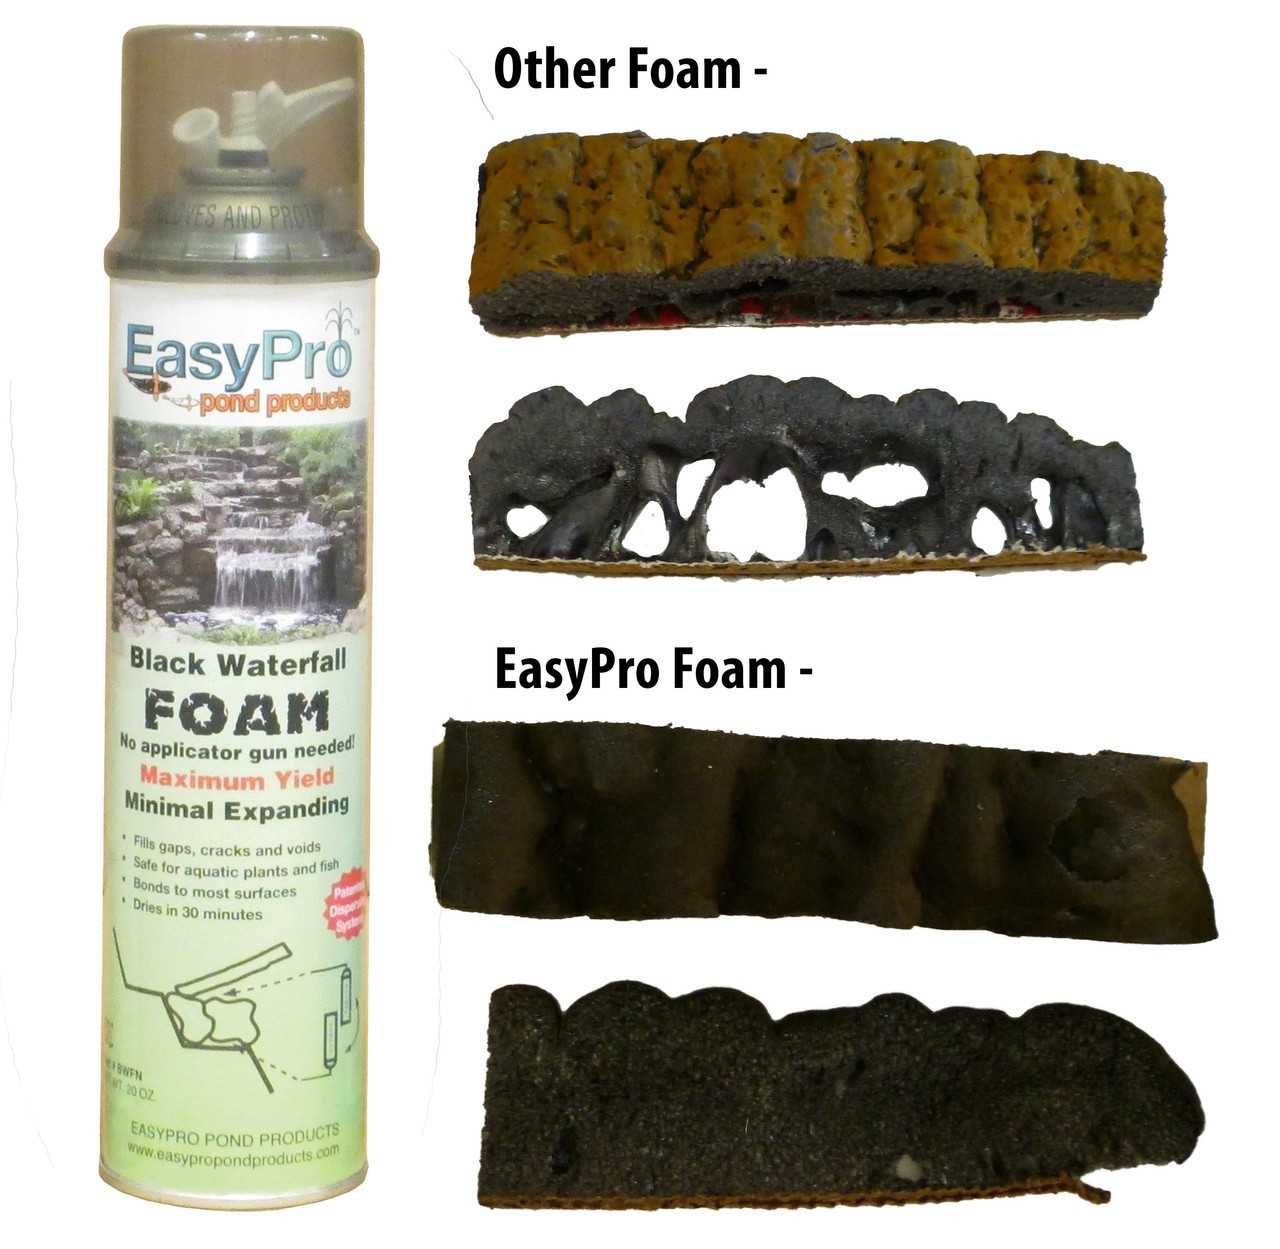 EasyPro Black Waterfall Foam compared to our foam
density and fade resistance to the competitors foam.